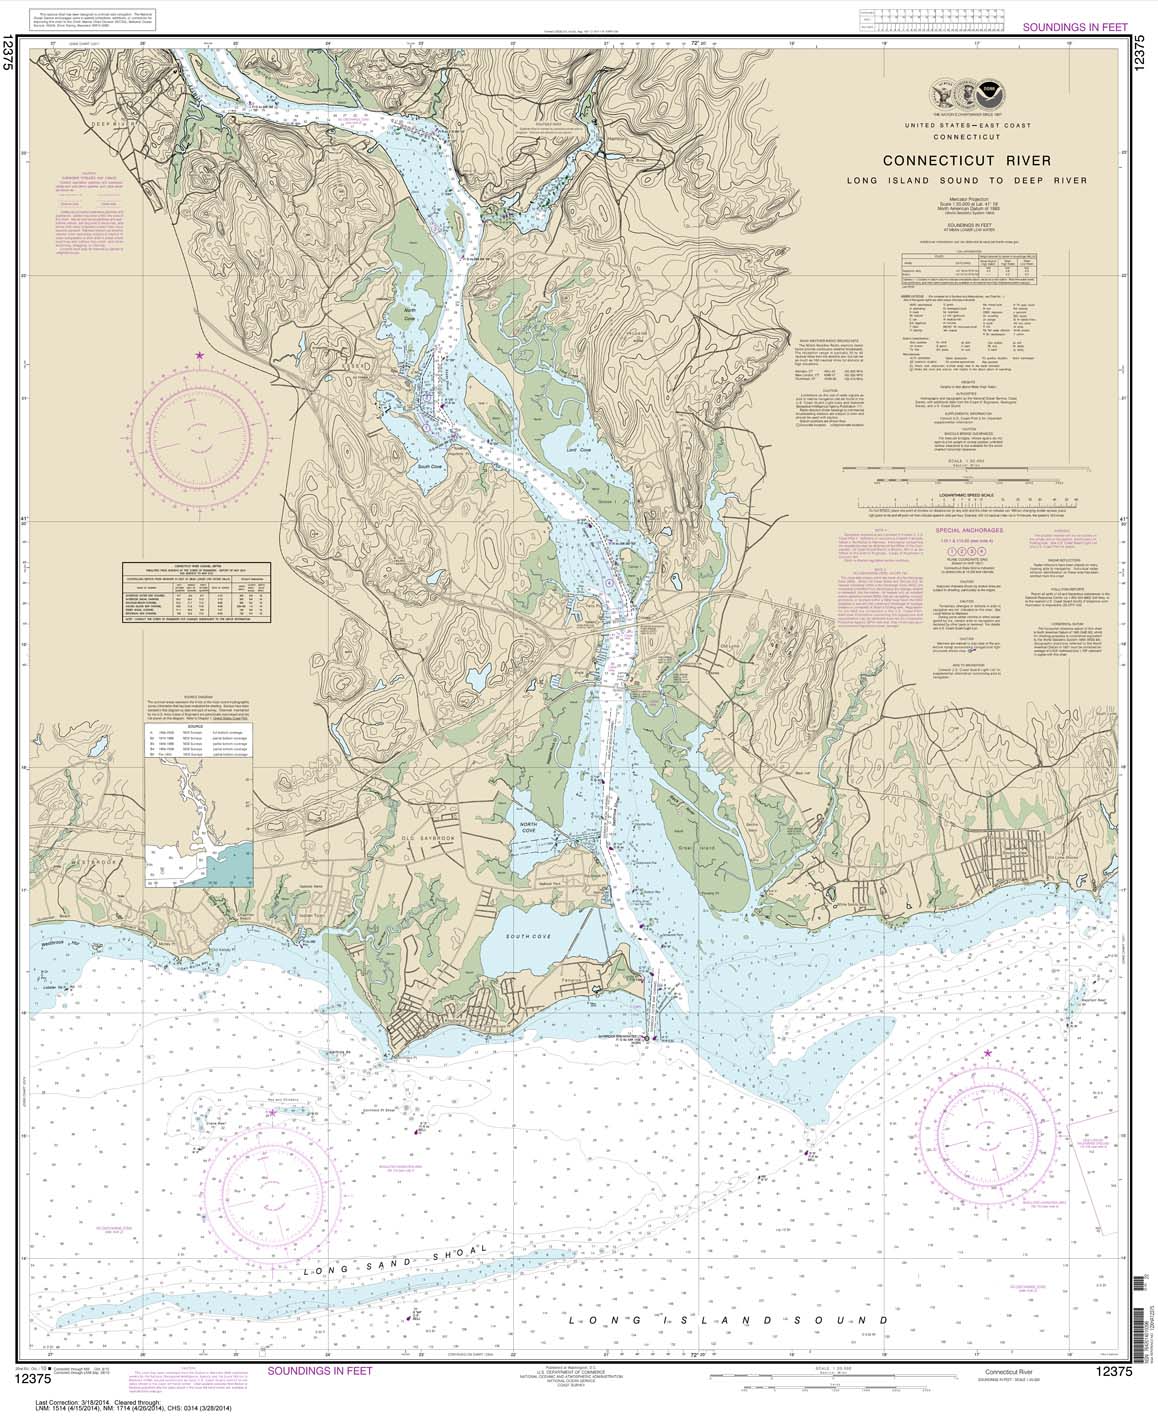 HISTORICAL NOAA Chart 12375: Connecticut River Long lsland Sound to Deep River